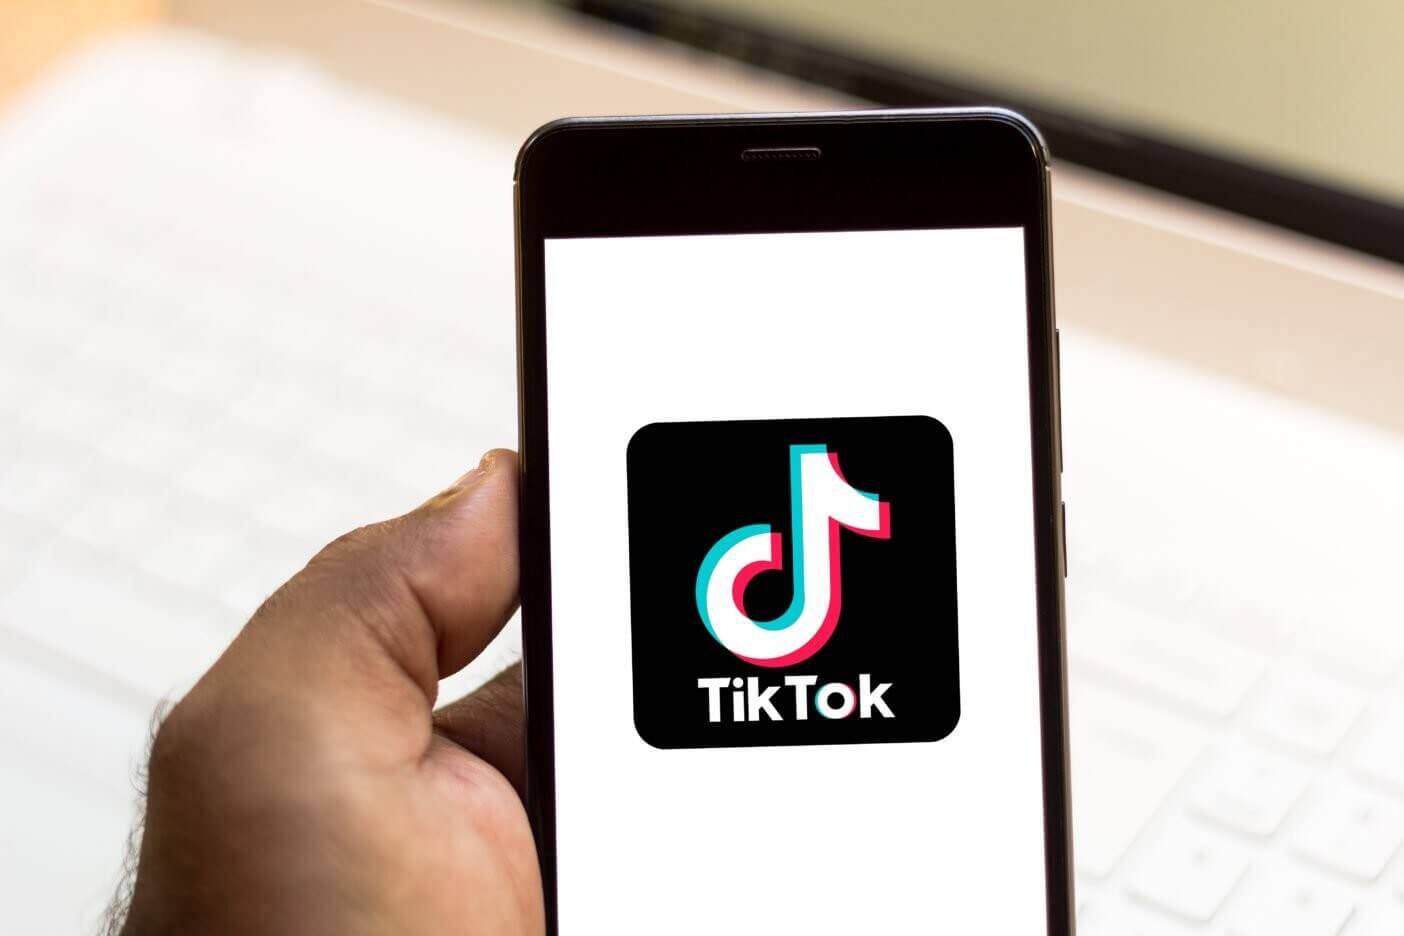 who currently owns tiktok